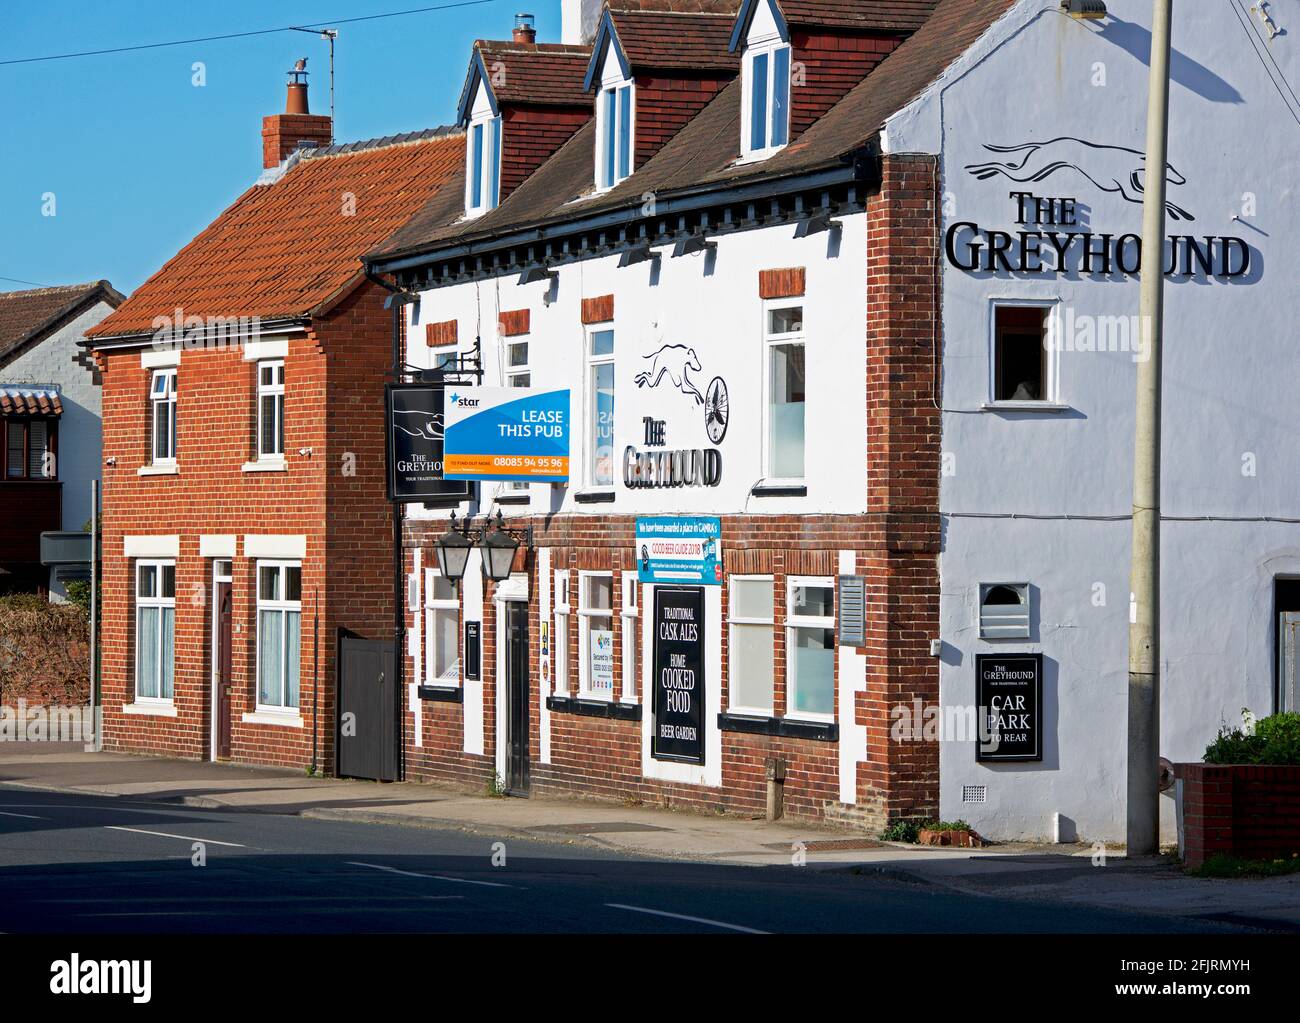 The Greyhound pub, in the village of Riccall, with a sign - Lease this pub - North Yorkshire, England UK Stock Photo